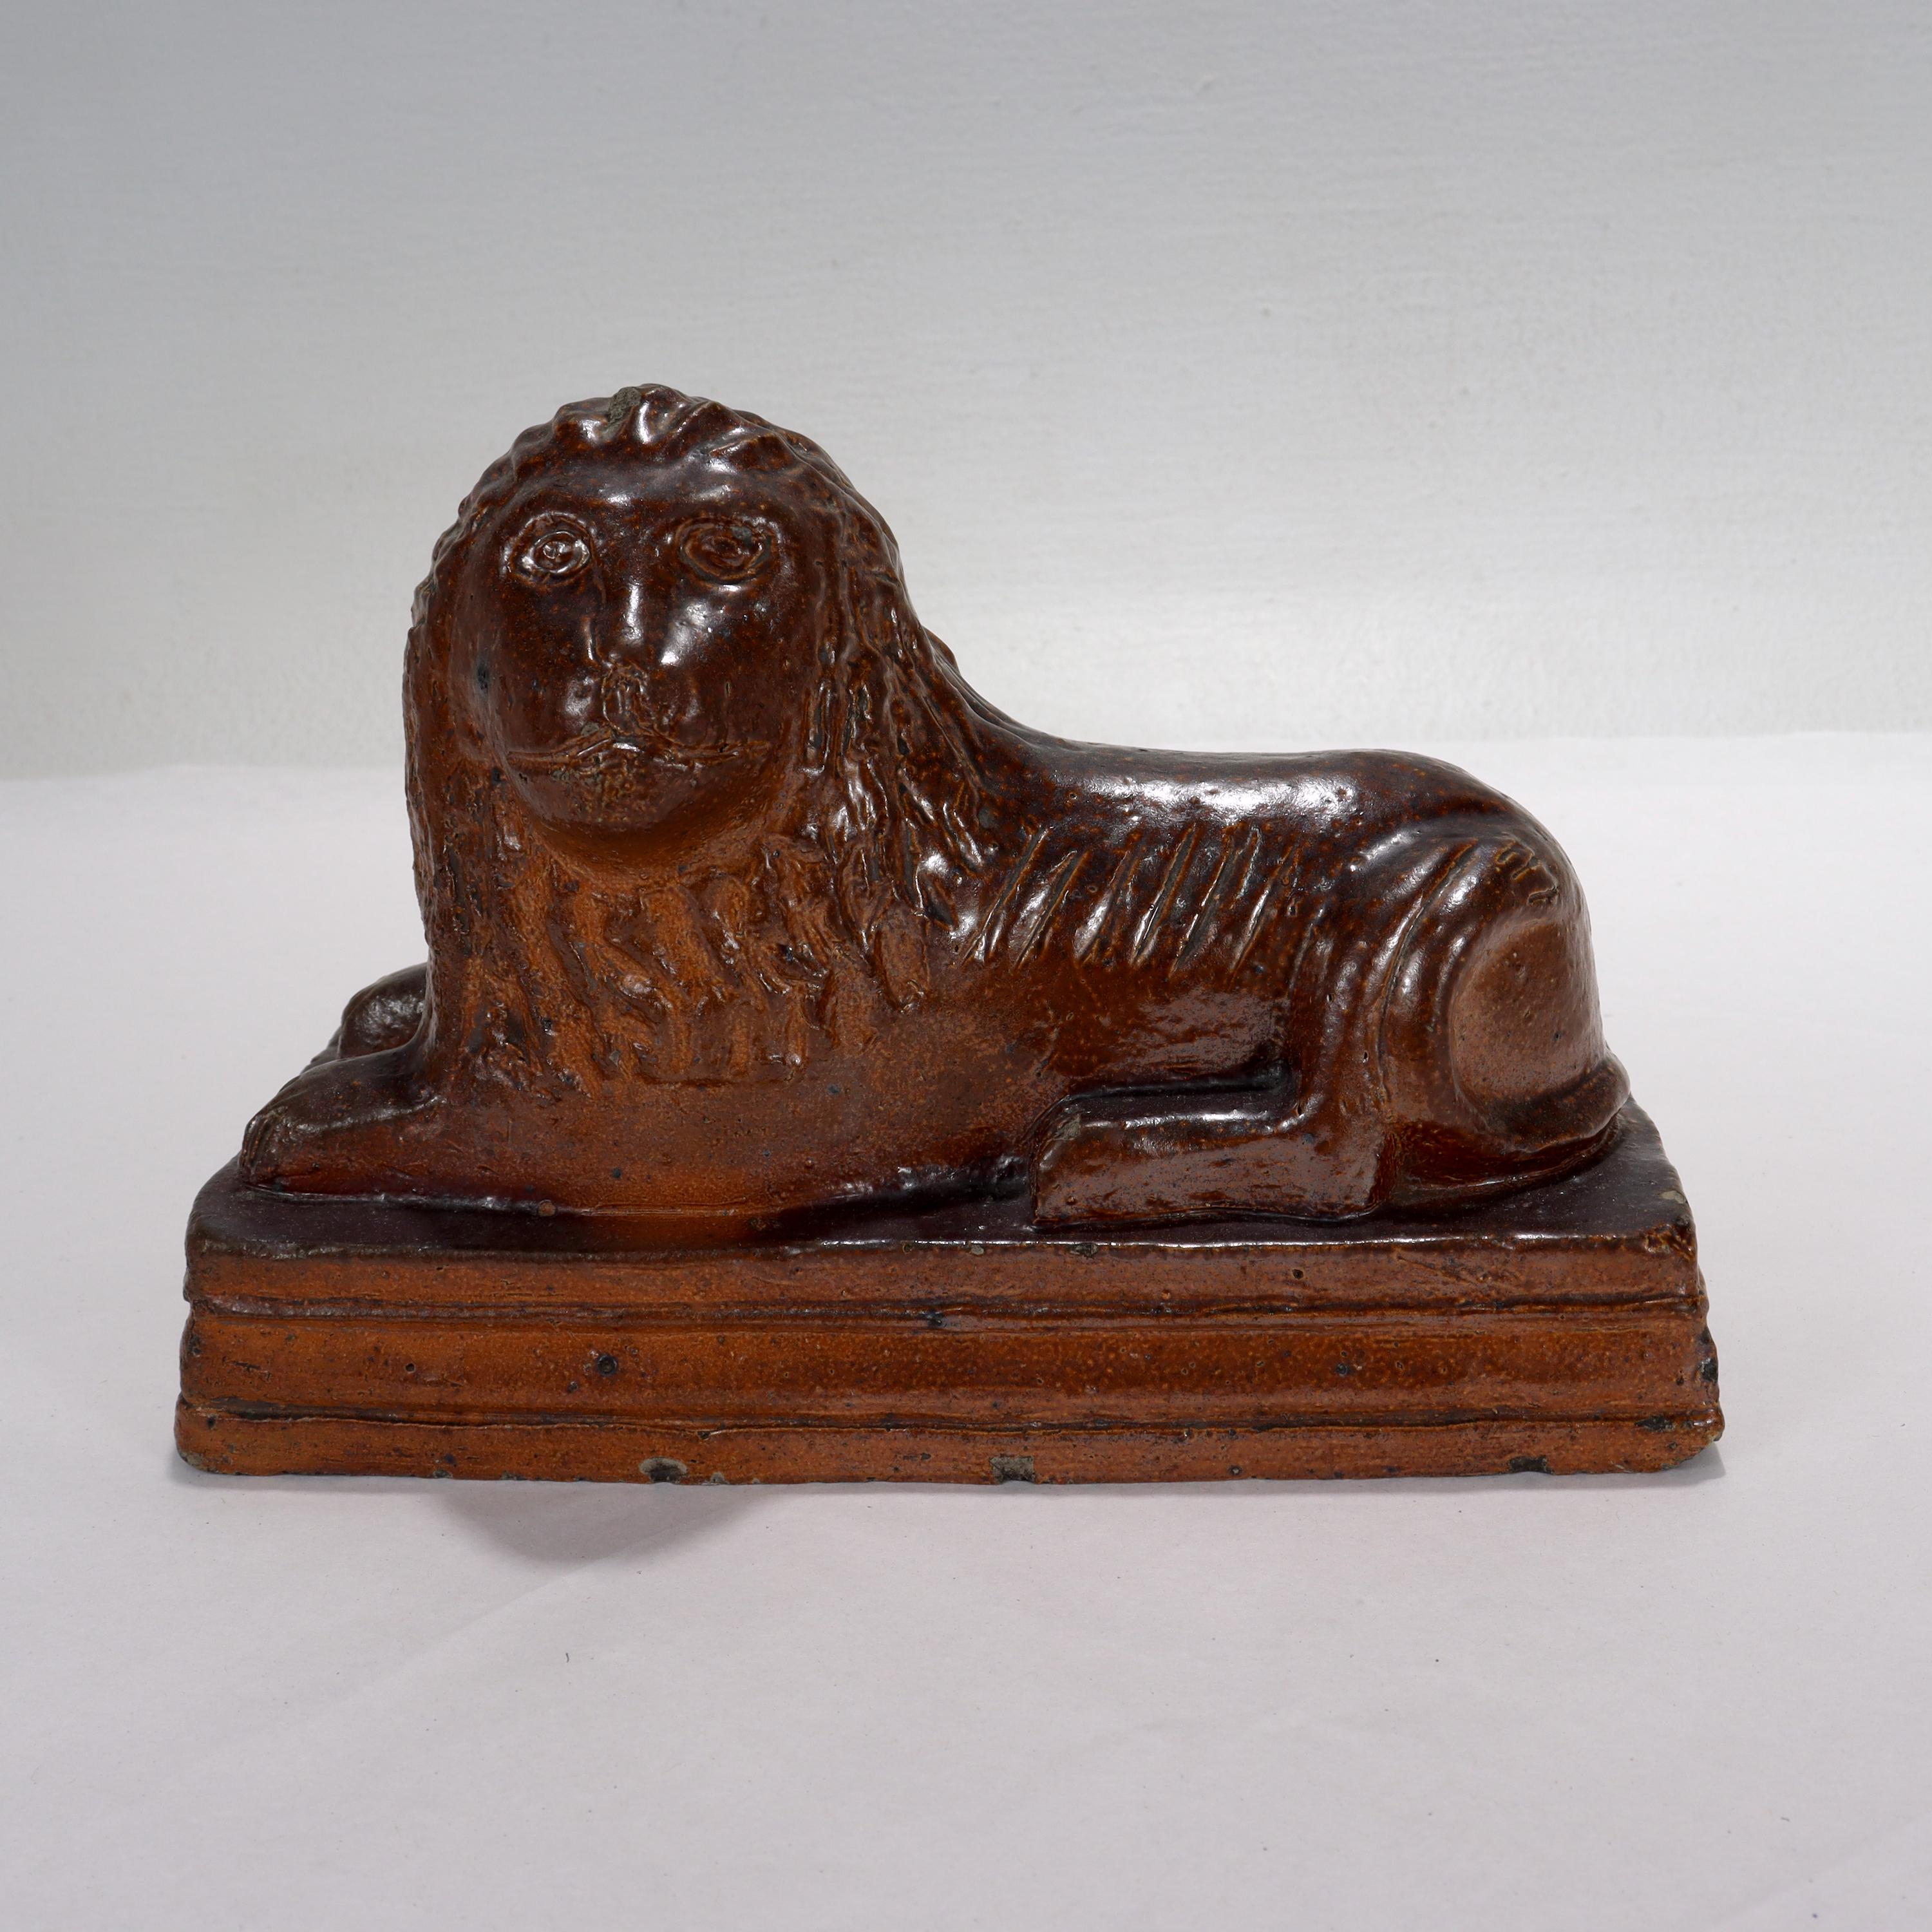 A fine antique signed Folk Art lion figurine.

In the form of a recumbent lion. 

Signed to the underside. The signature appears to read: 'J Silverthorn'

Made out of a reddish-brown redware or stoneware sewer tile pottery.

Simply a great